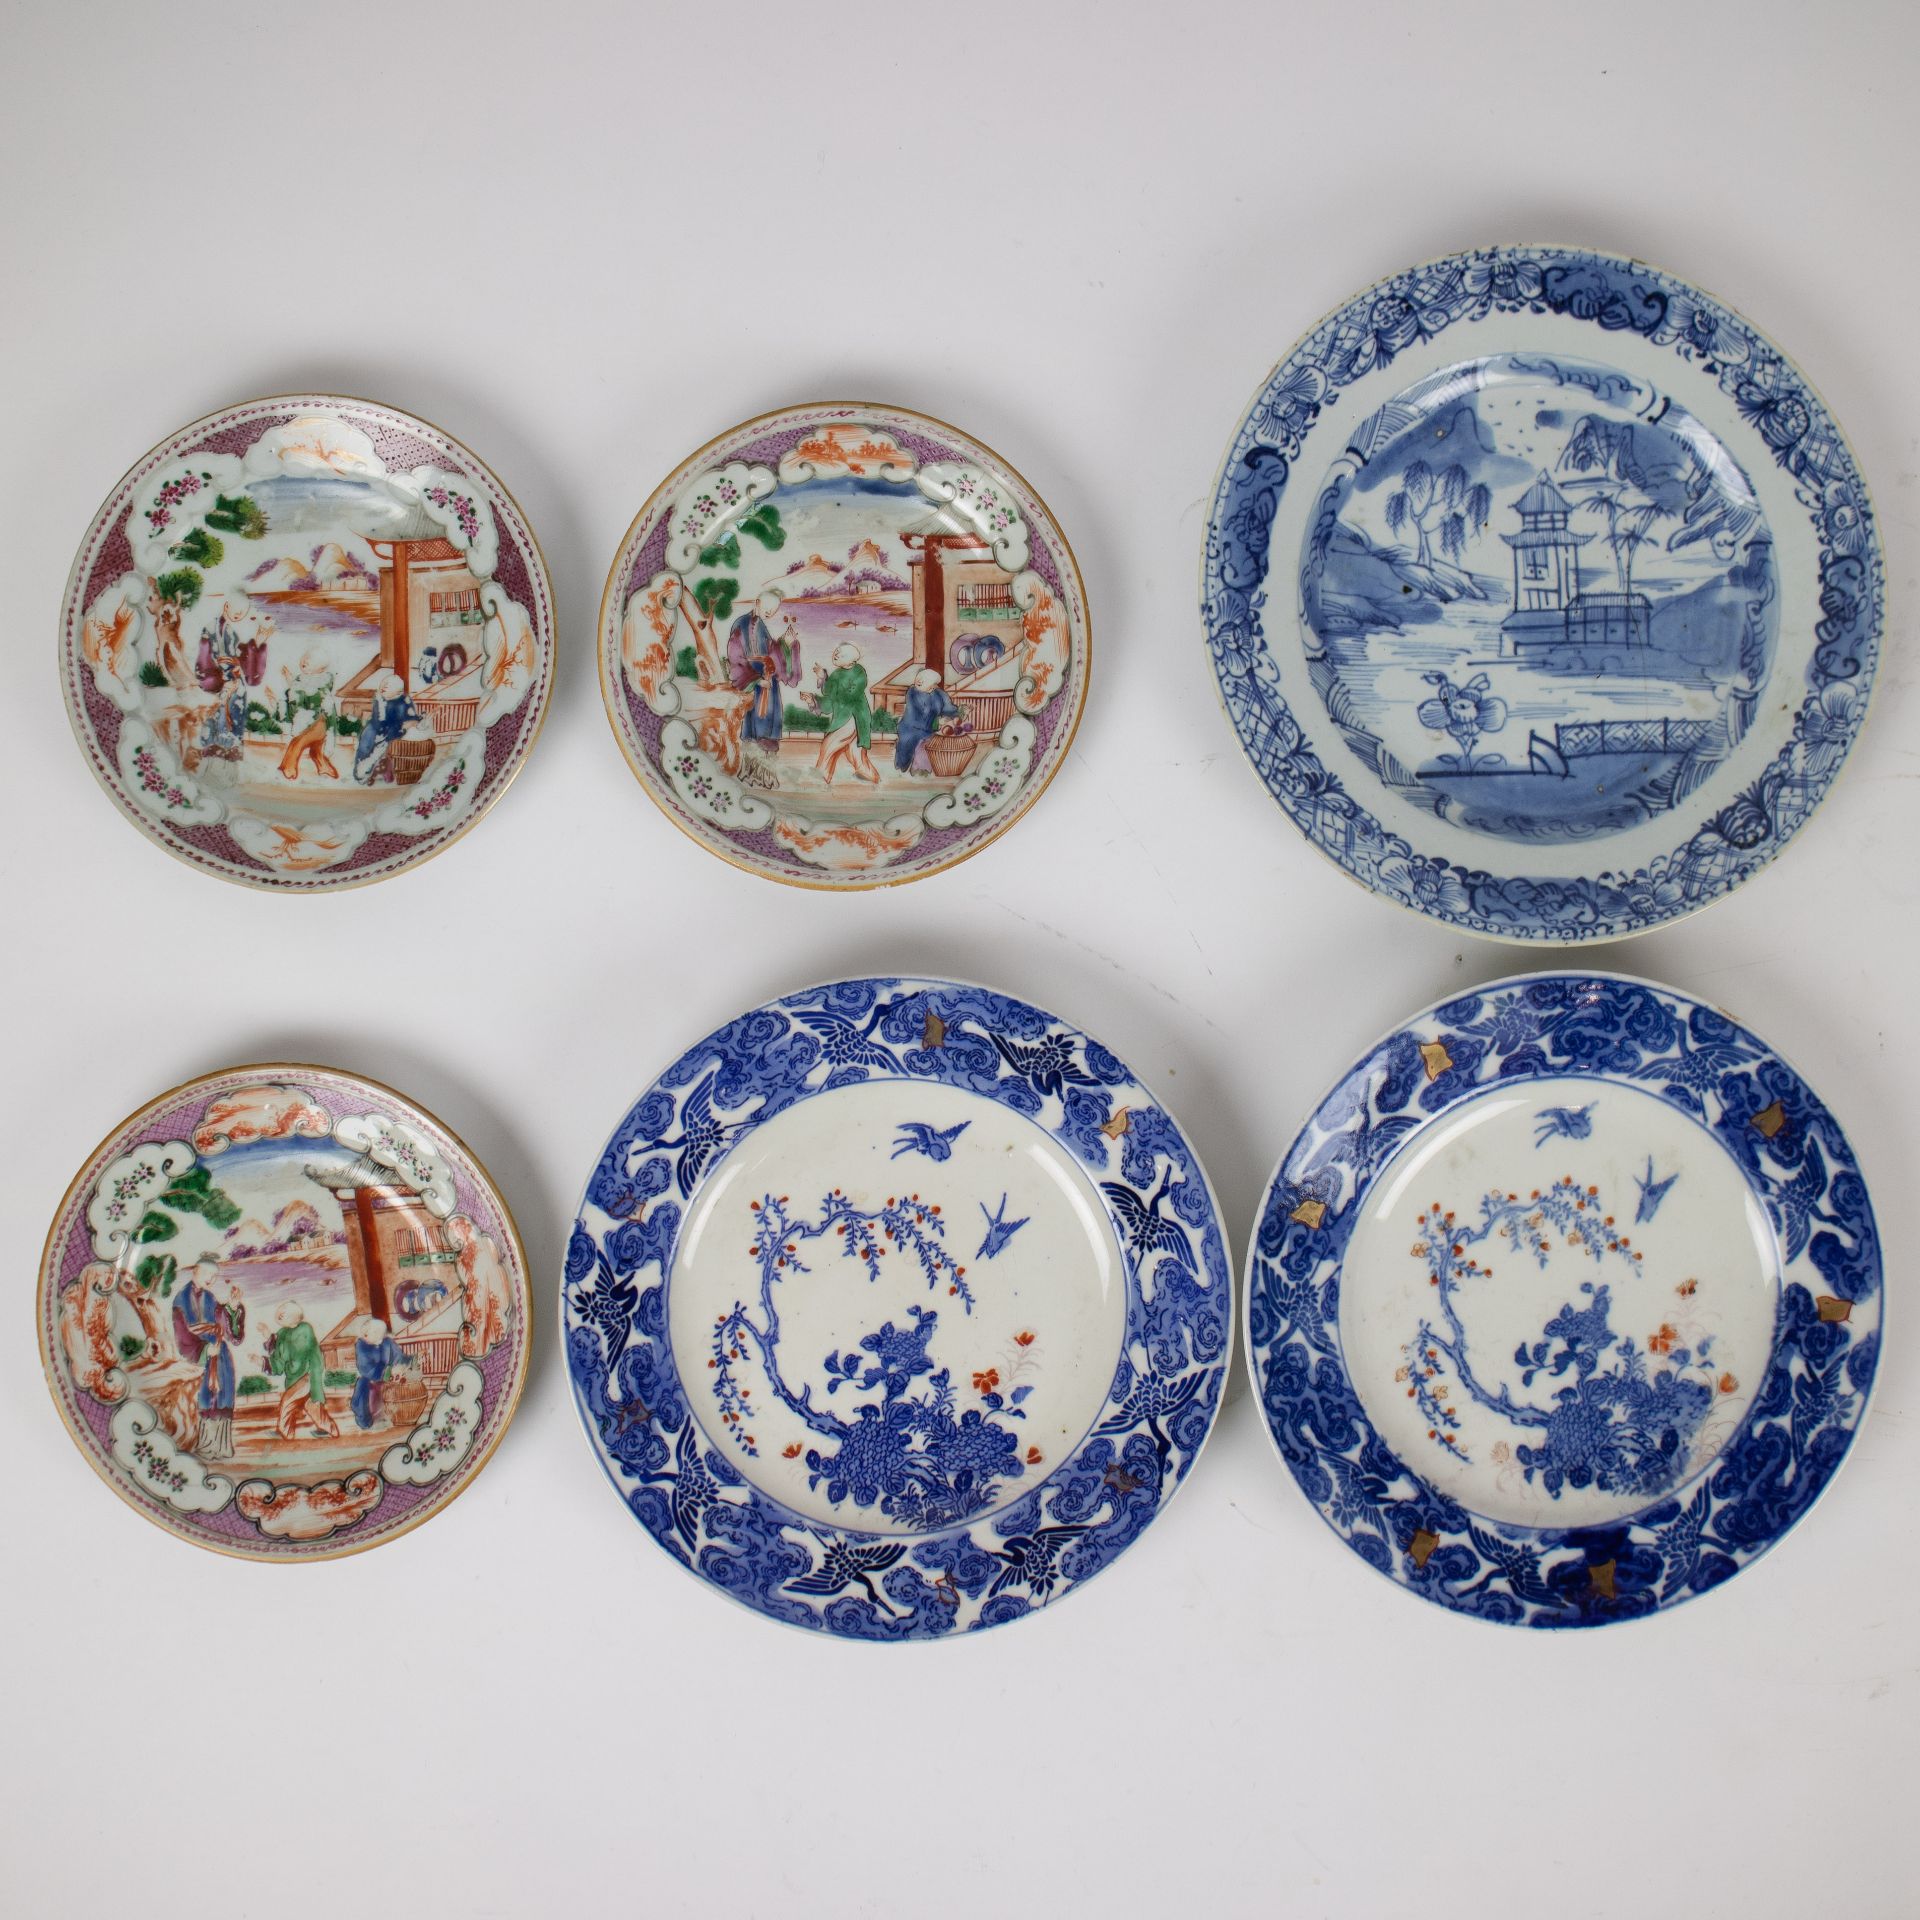 A collection of 4 Chinese plates 18th century and 2 Japanese plates